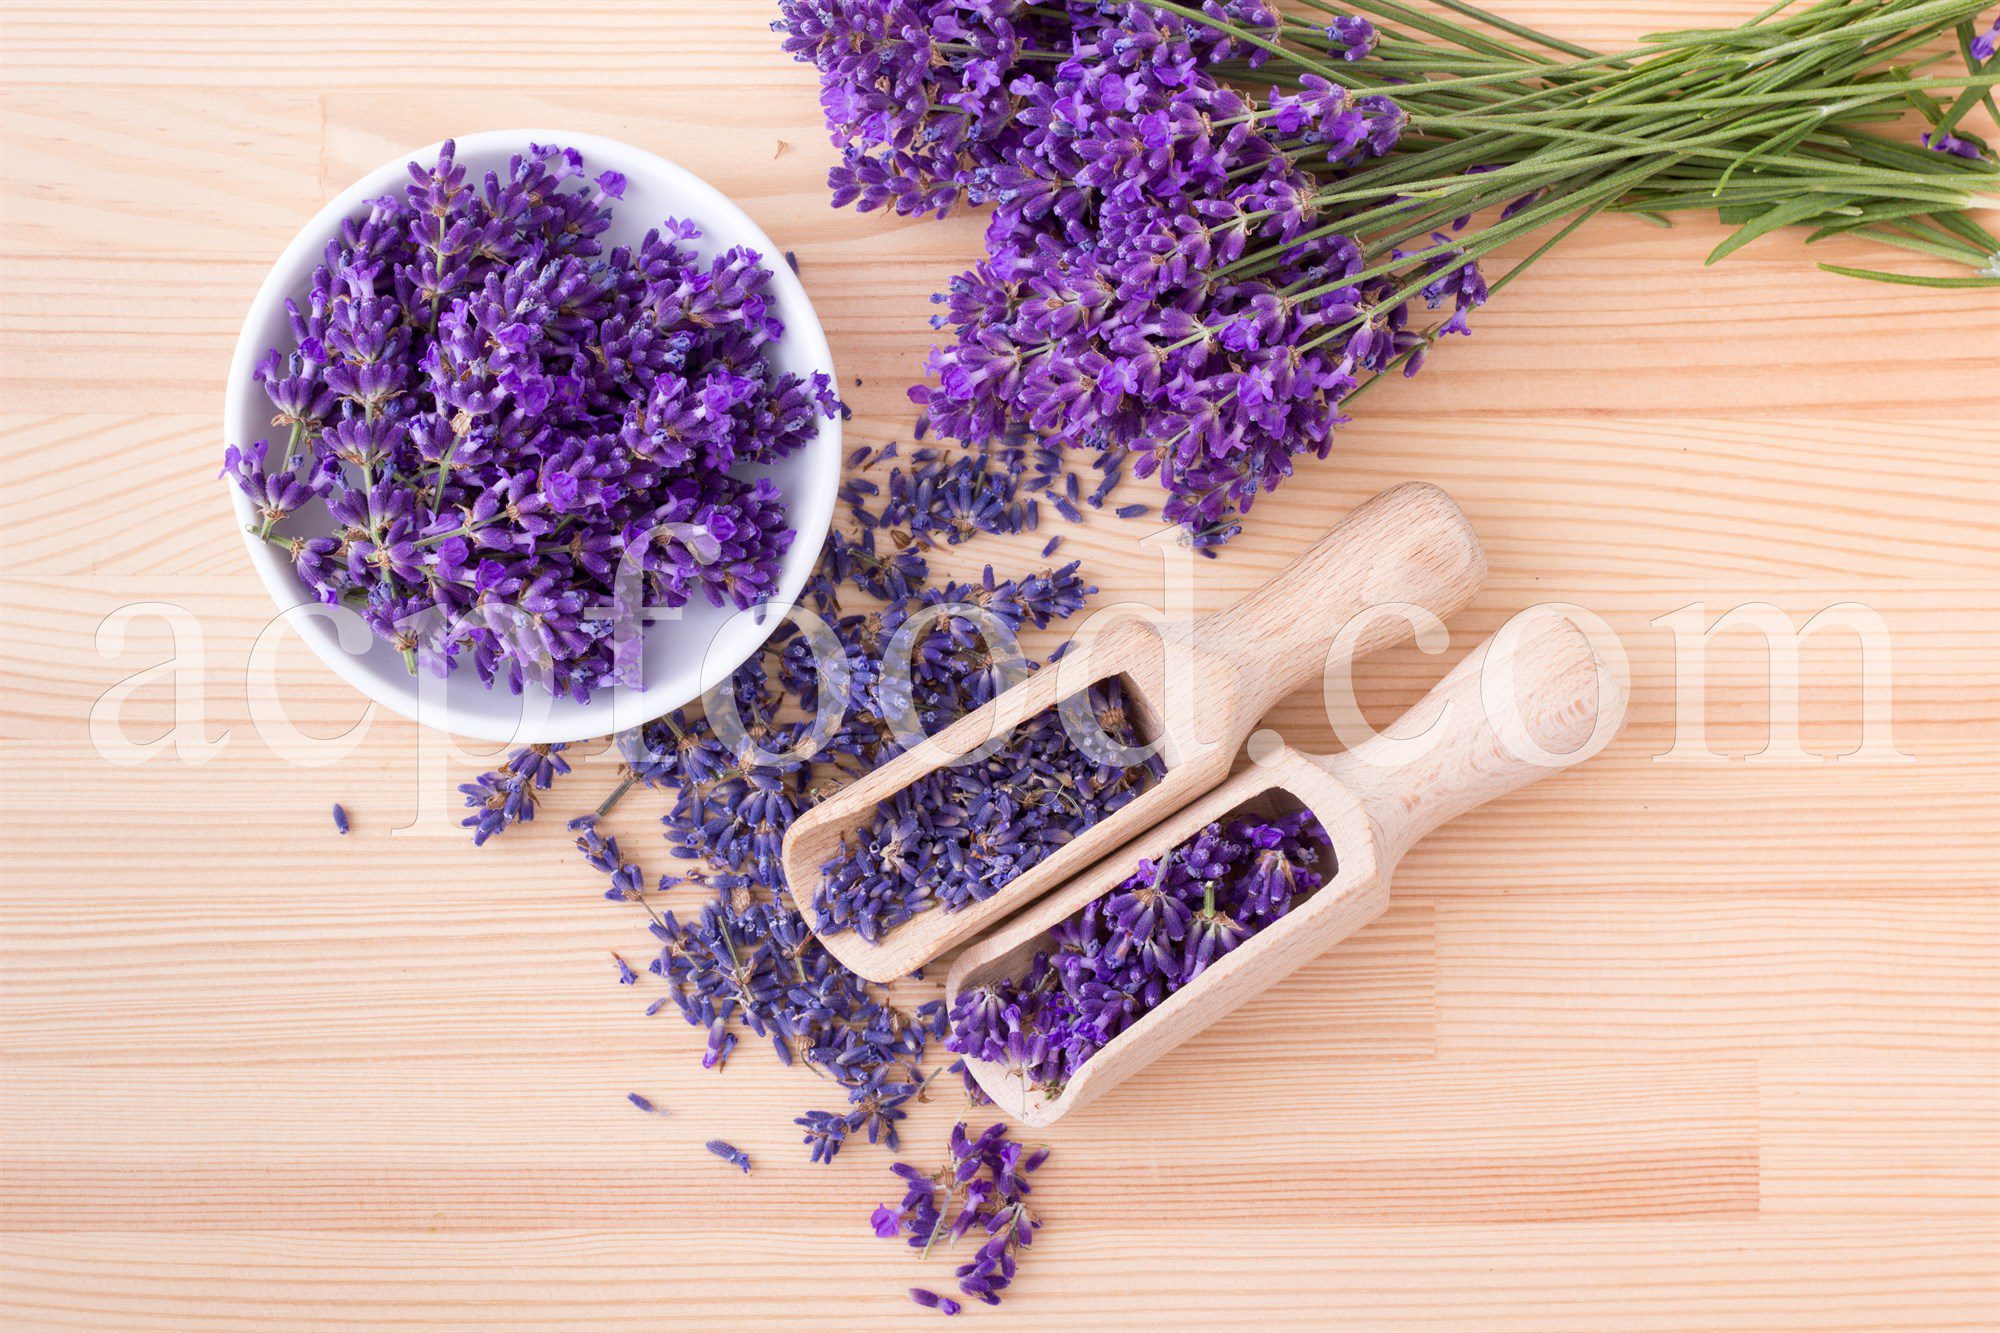 Herbs and fruits which can lighten you up. Lavender.